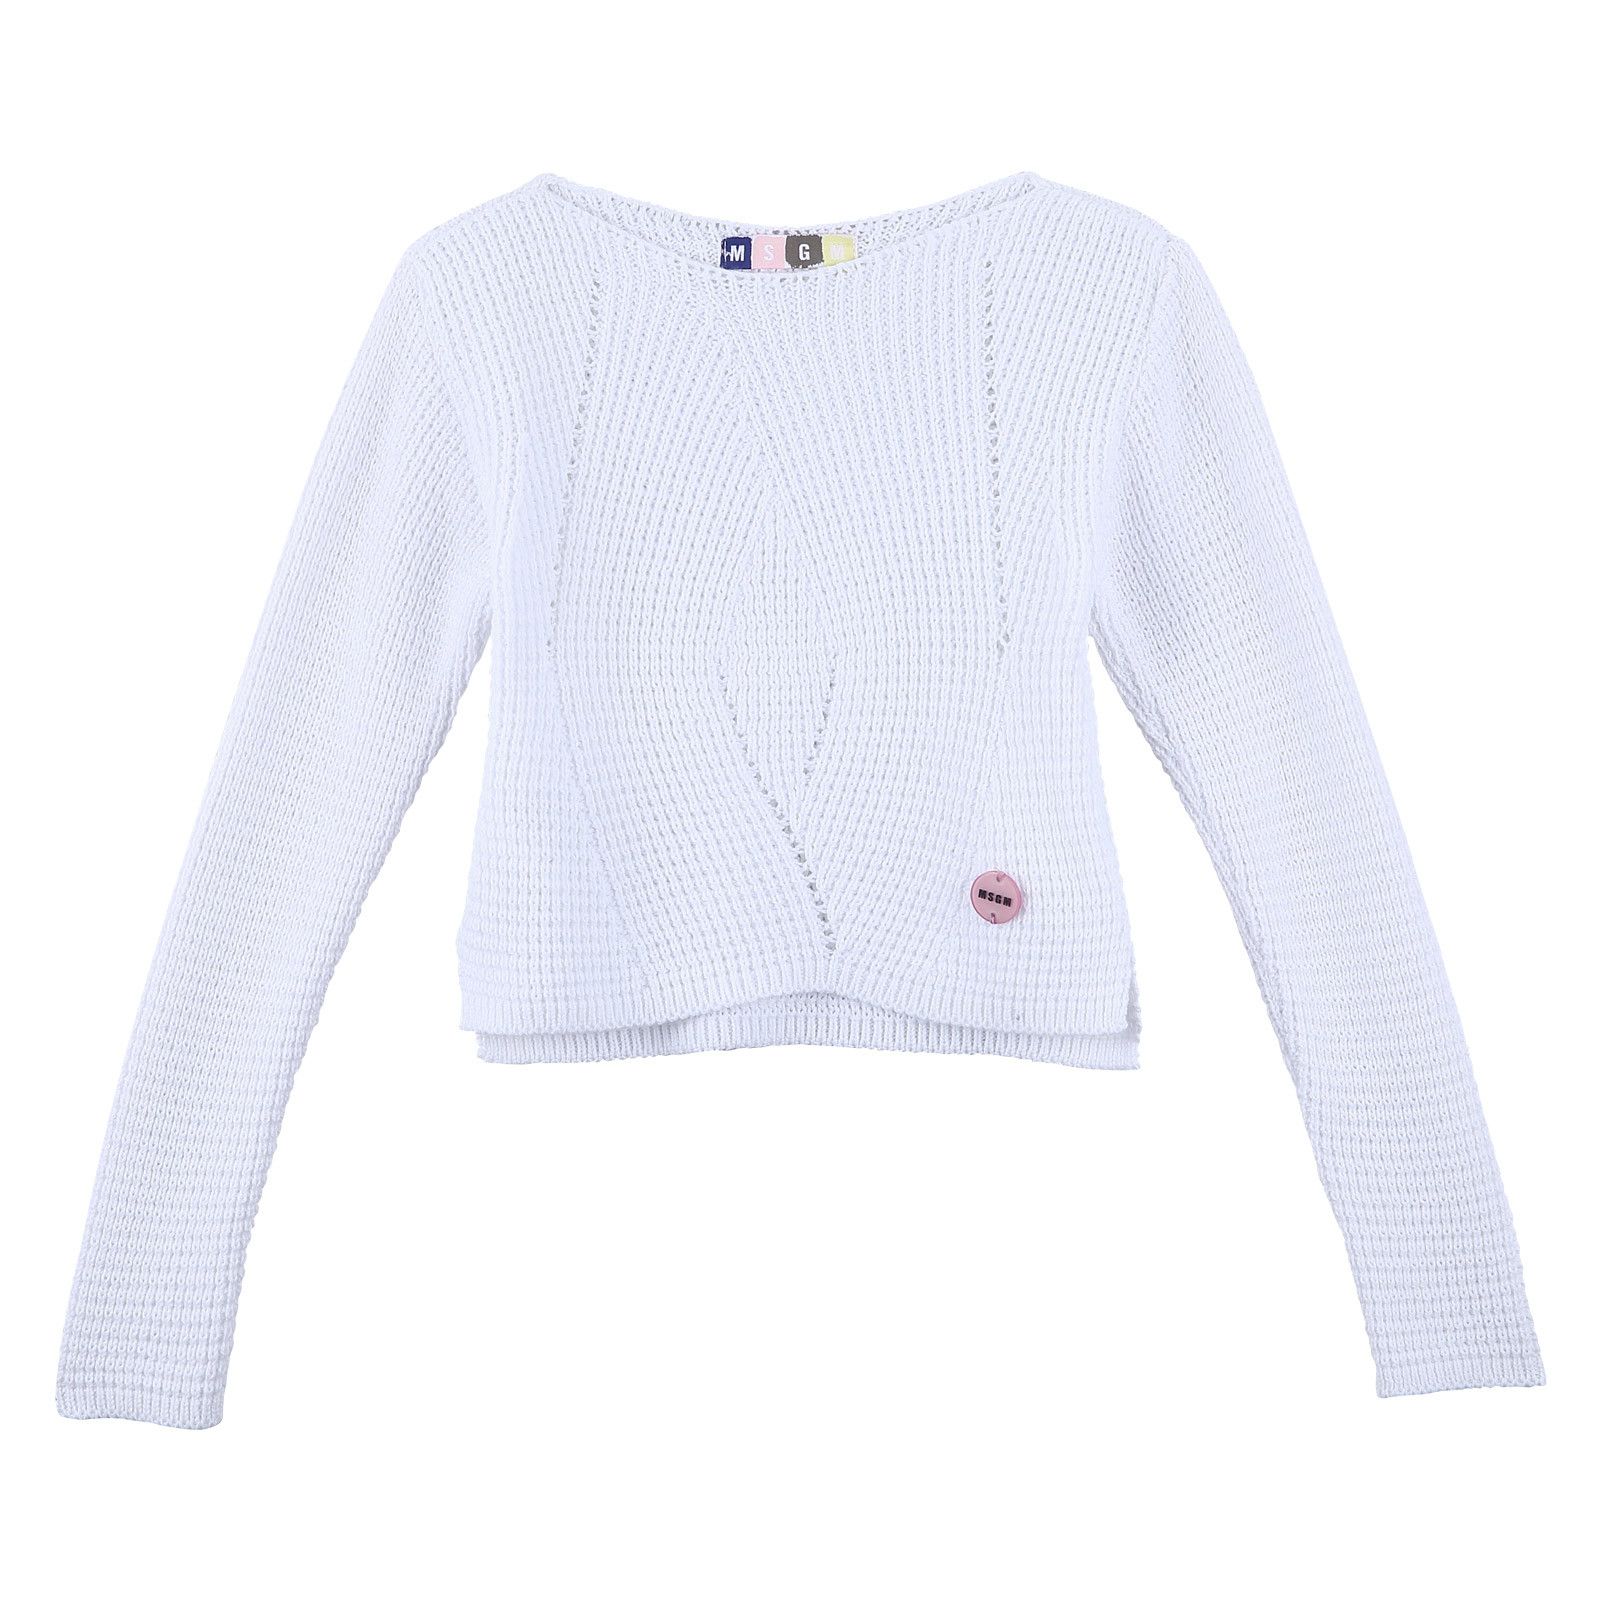 Girls White Knitted Jersey Cardigan With Brand Logo Patch - CÉMAROSE | Children's Fashion Store - 1